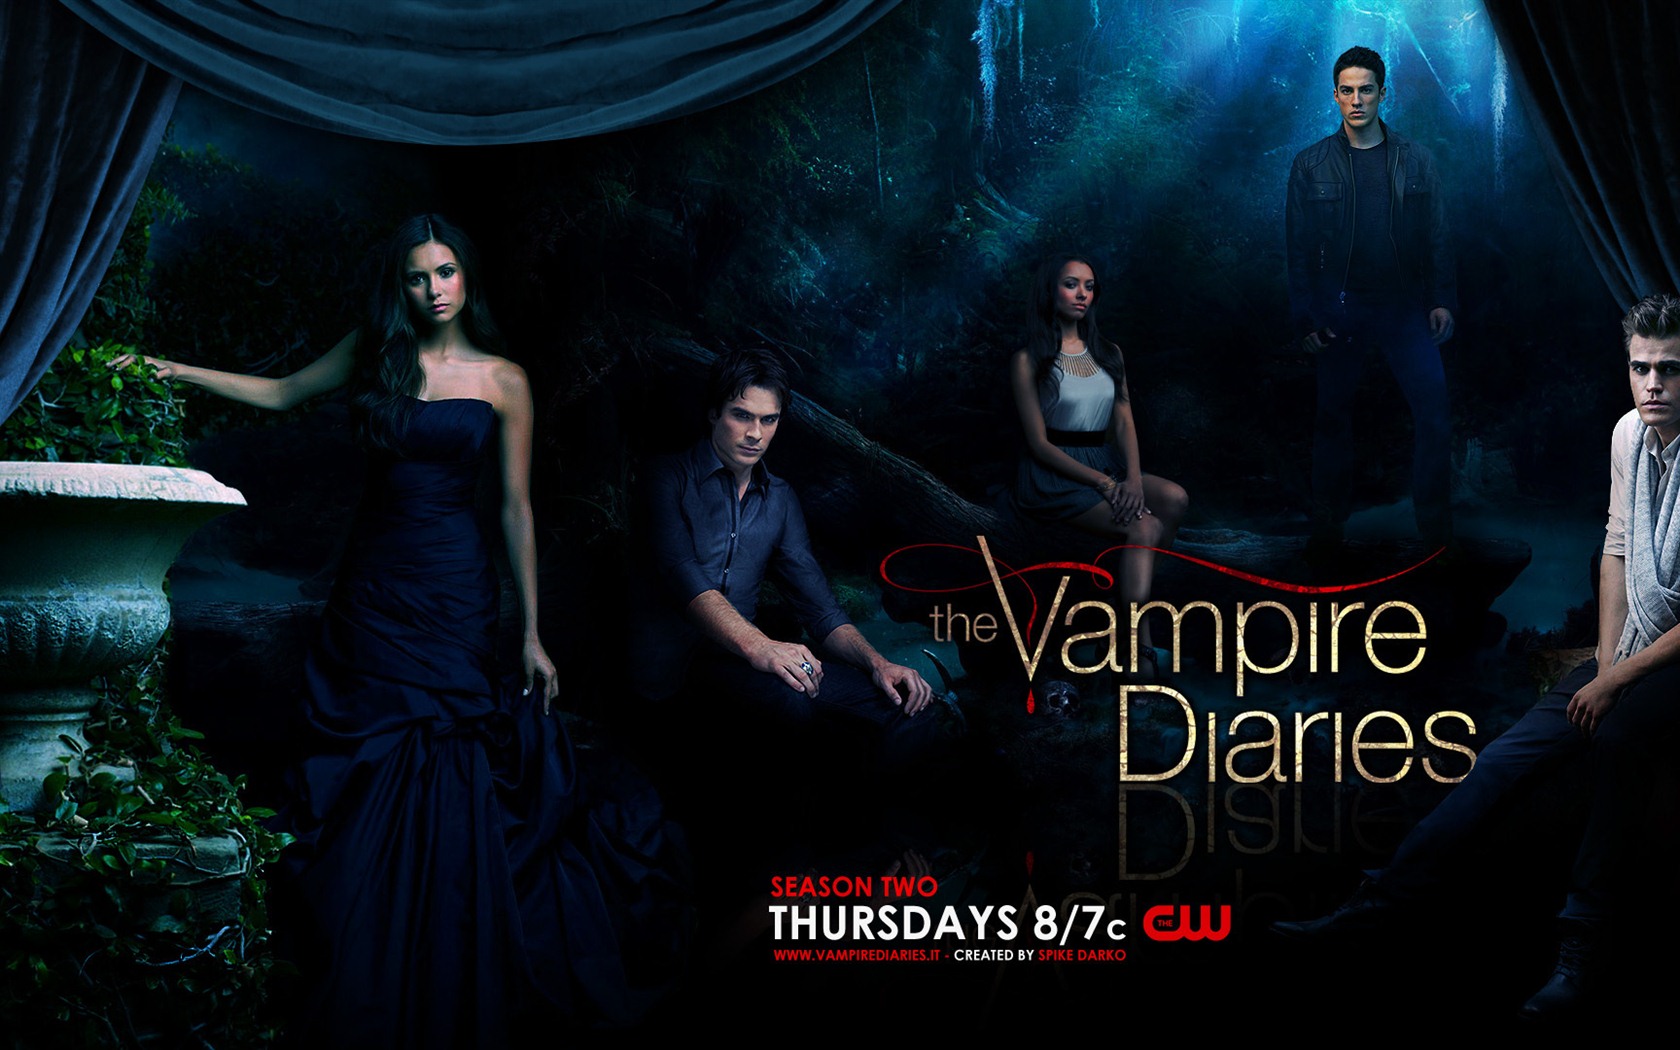 The Vampire Diaries HD Wallpapers #18 - 1680x1050